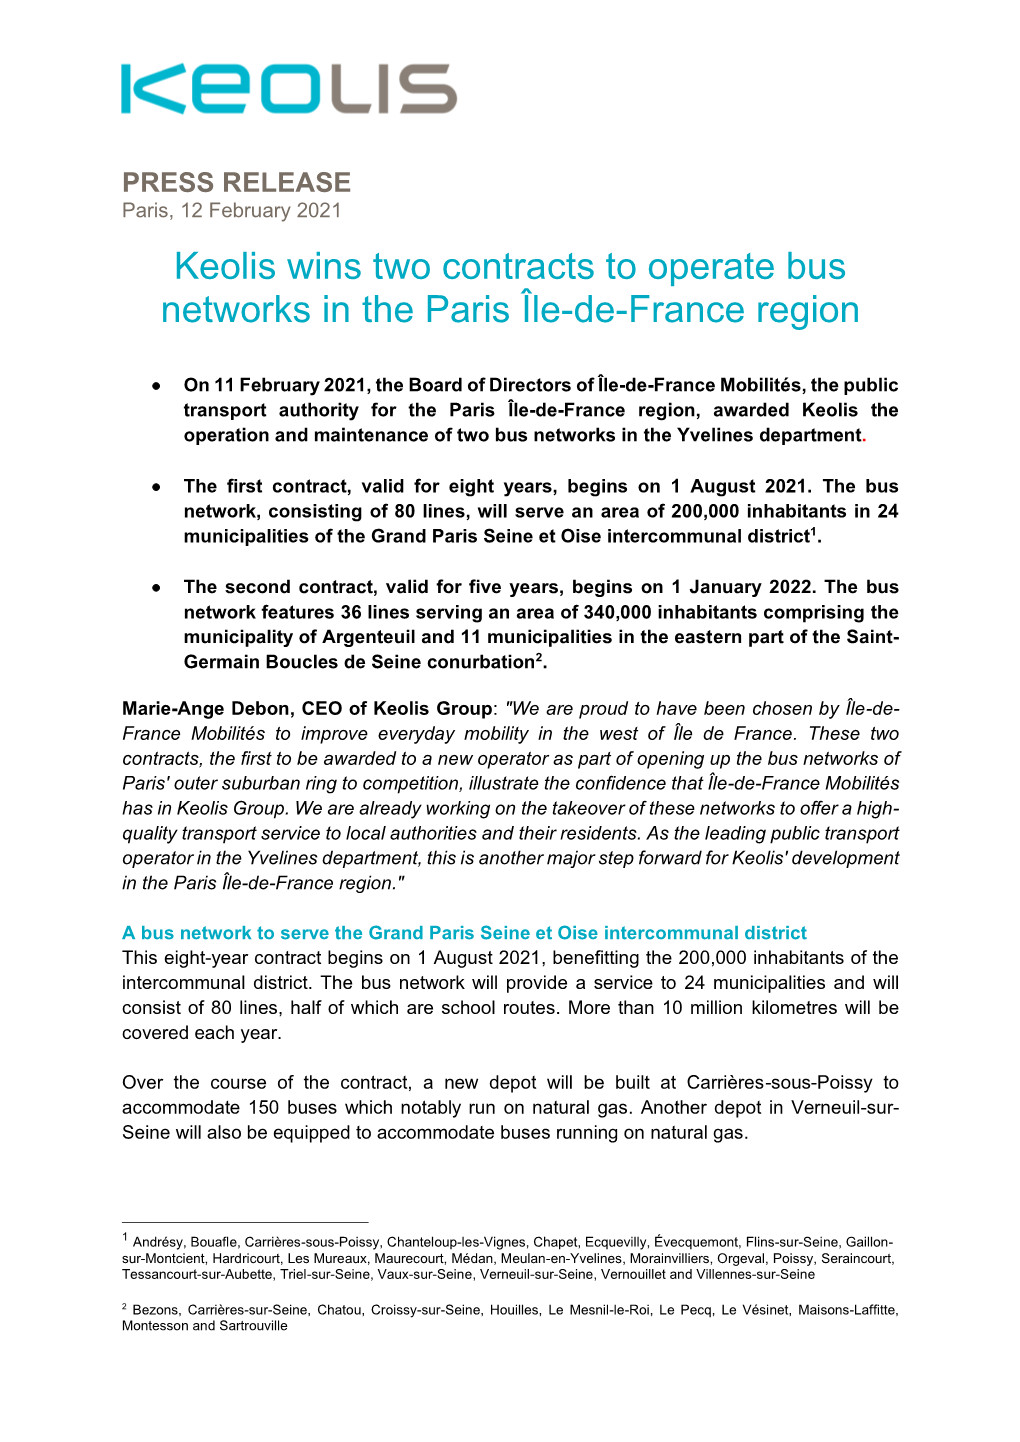 Keolis Wins Two Contracts to Operate Bus Networks in the Paris Île-De-France Region